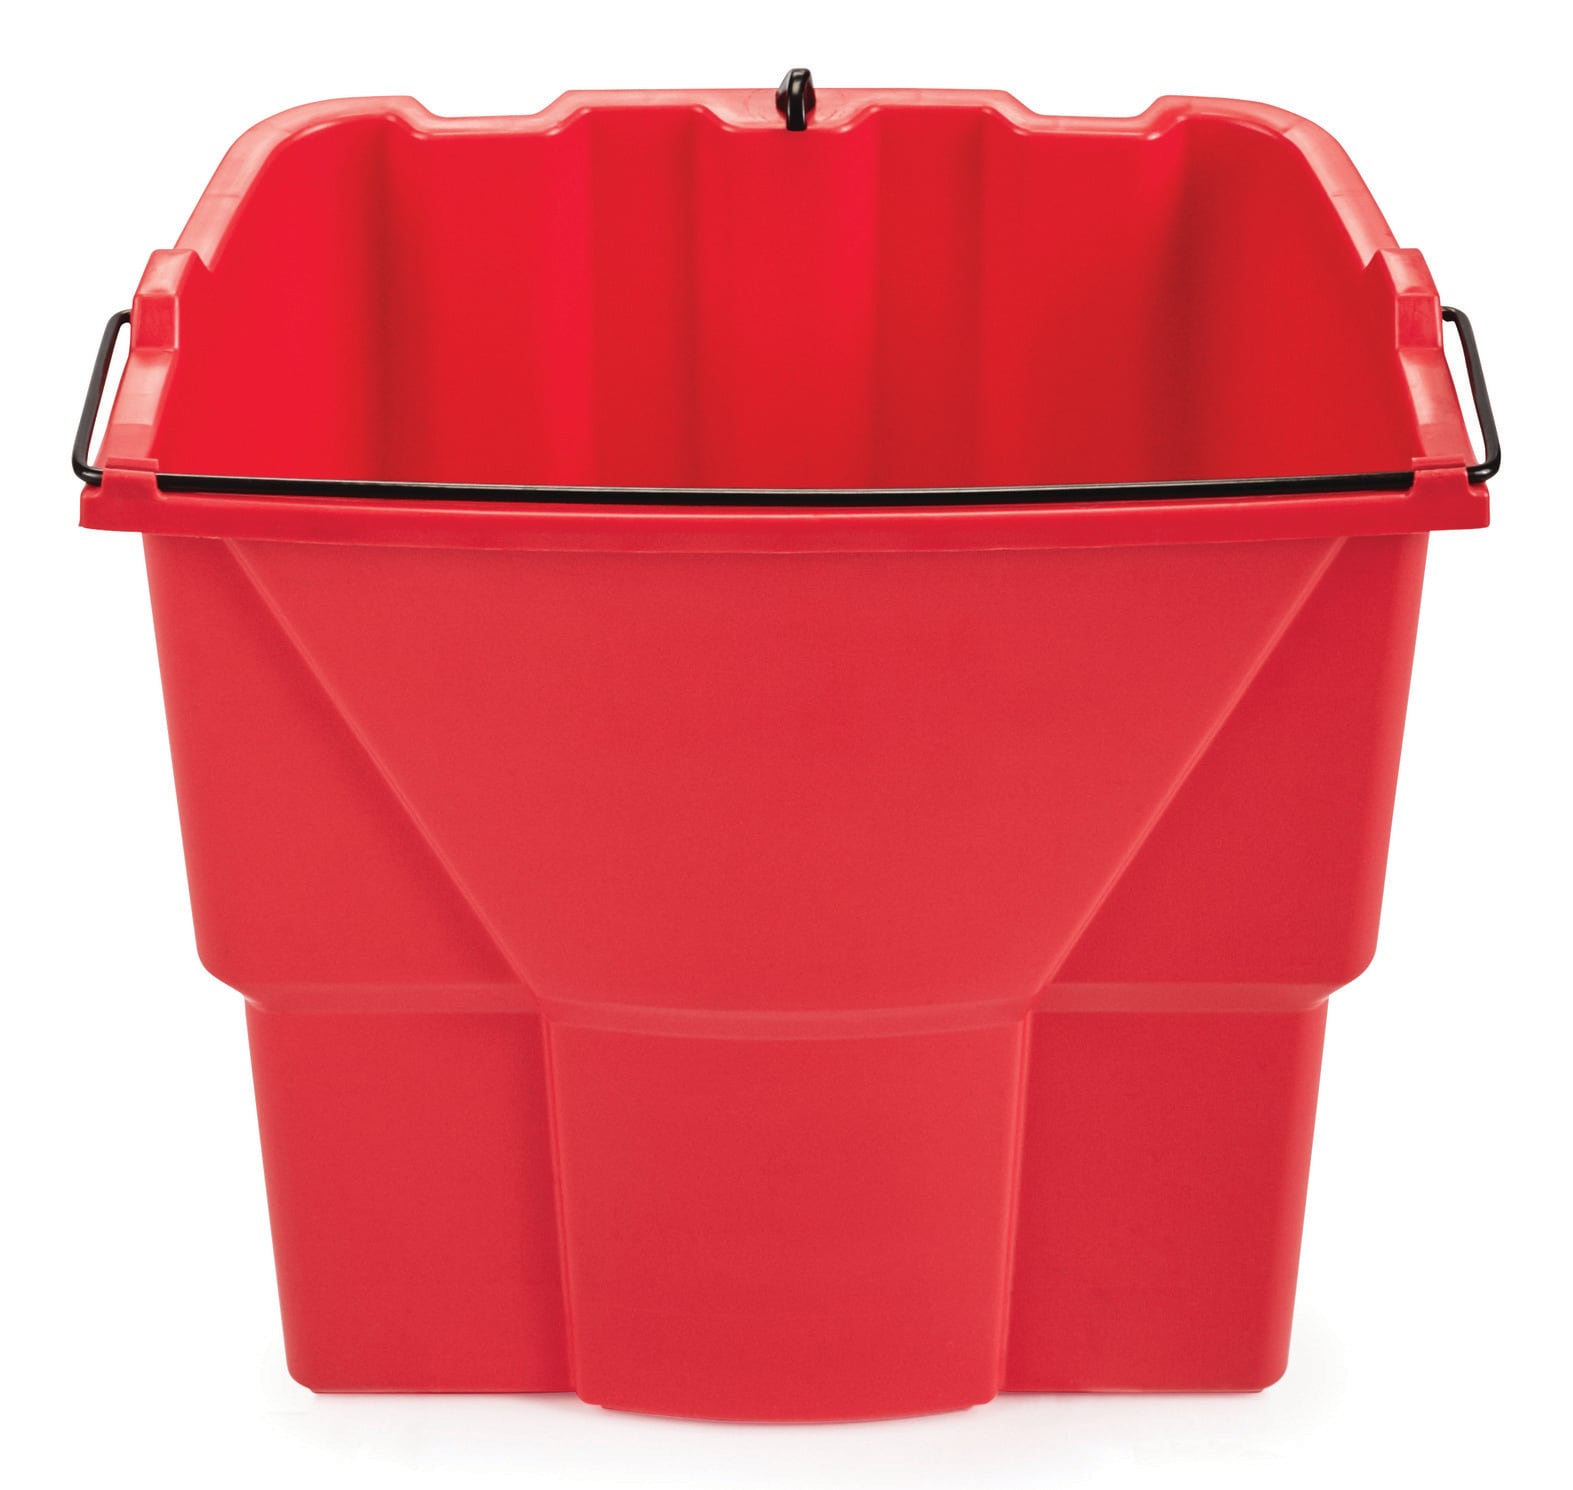 Rubbermaid Commercial Products 19 Qt. Red Plastic Double Bucket FG